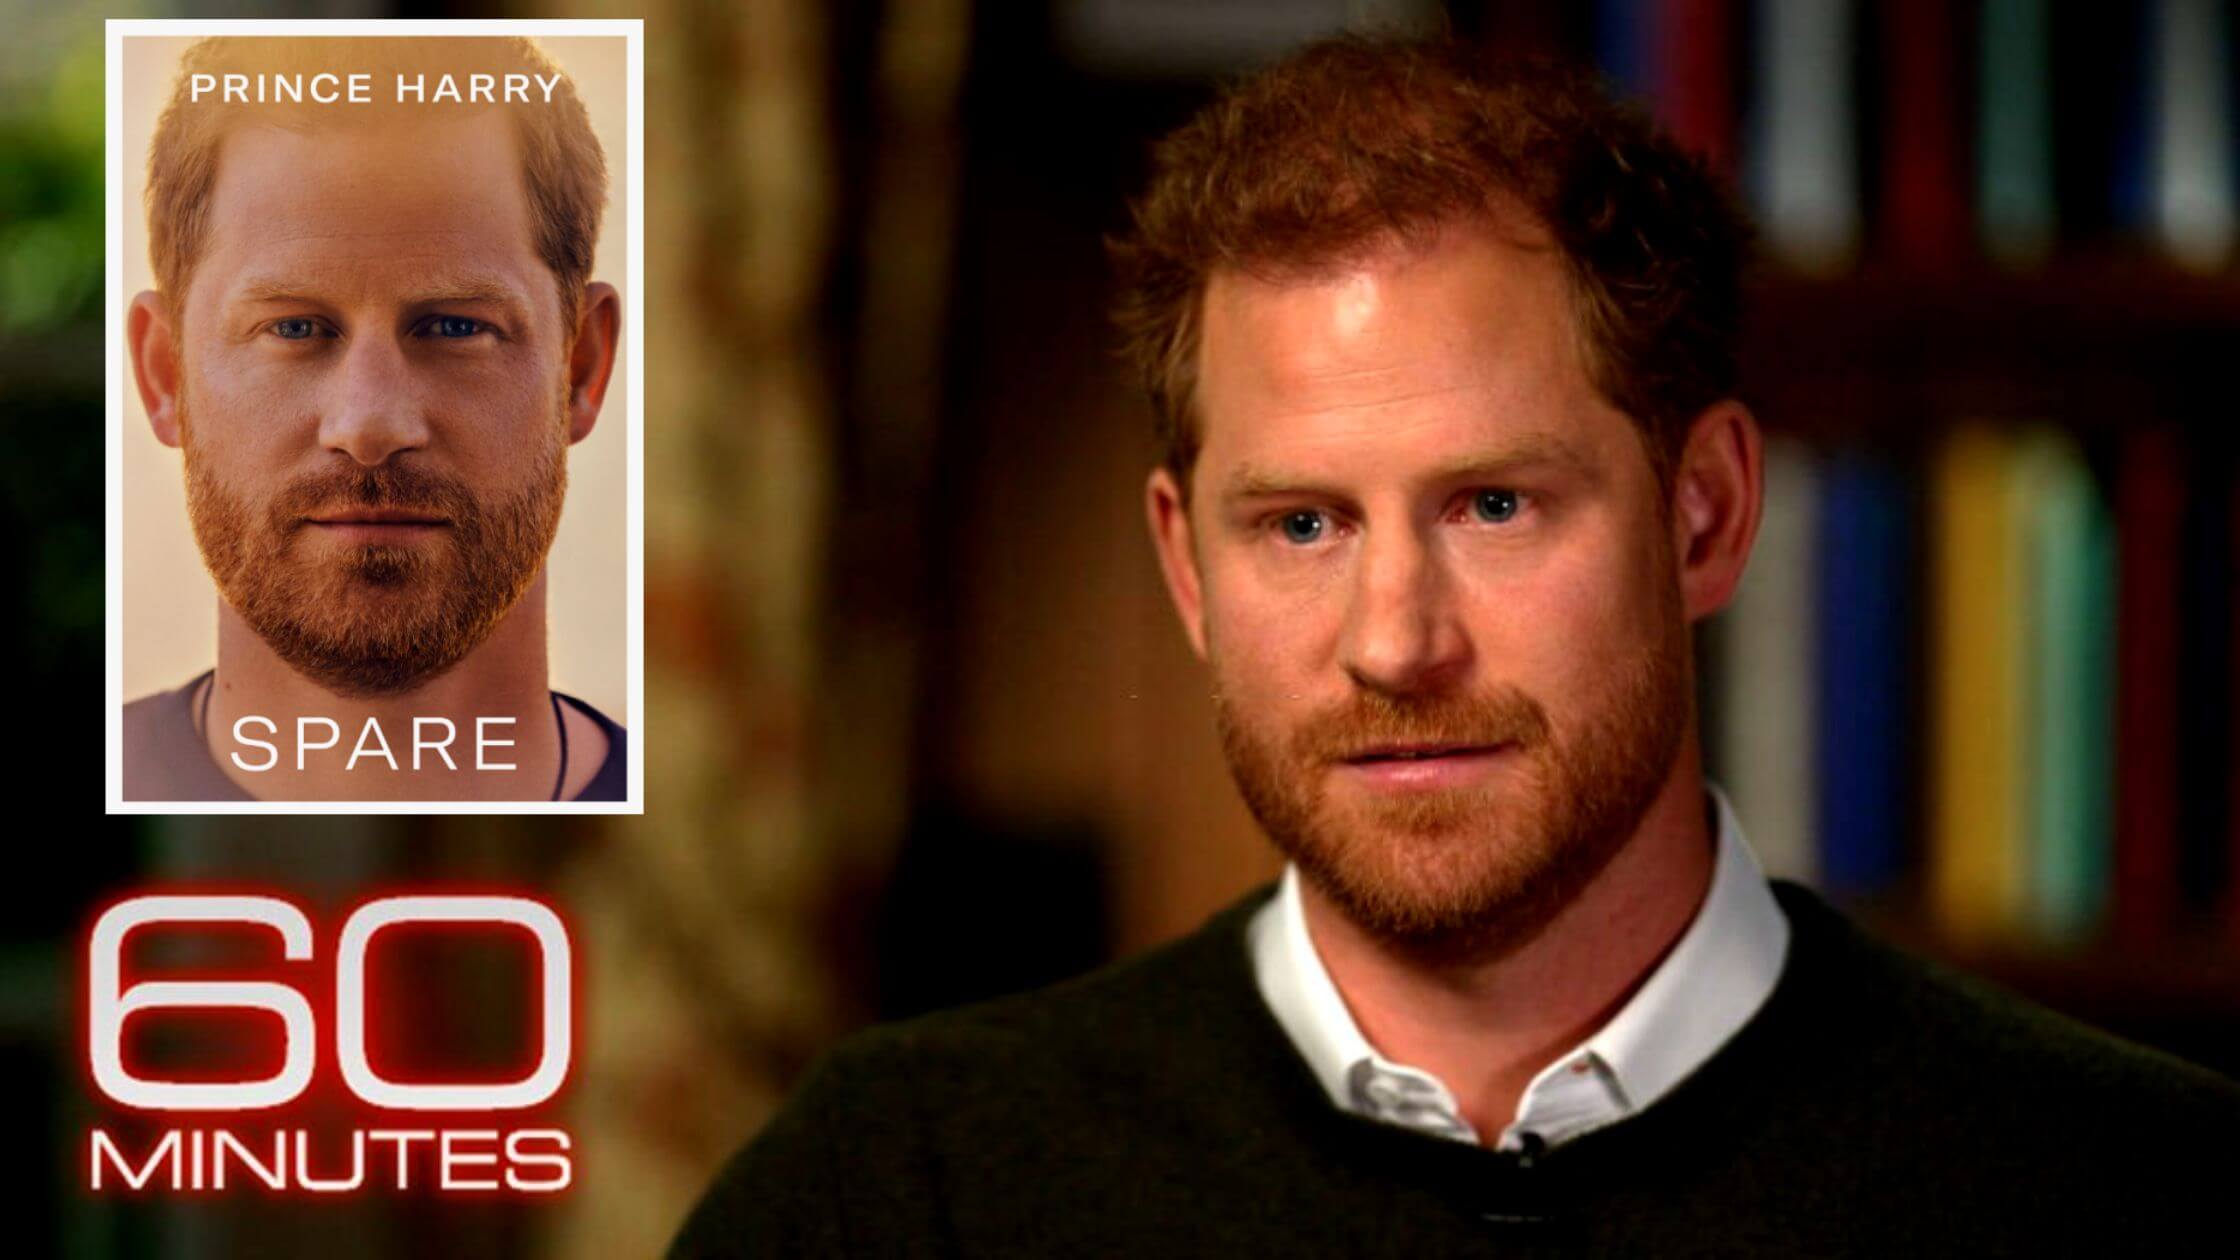 How To Watch Prince Harry's 60 Minutes Interview With Anderson Cooper